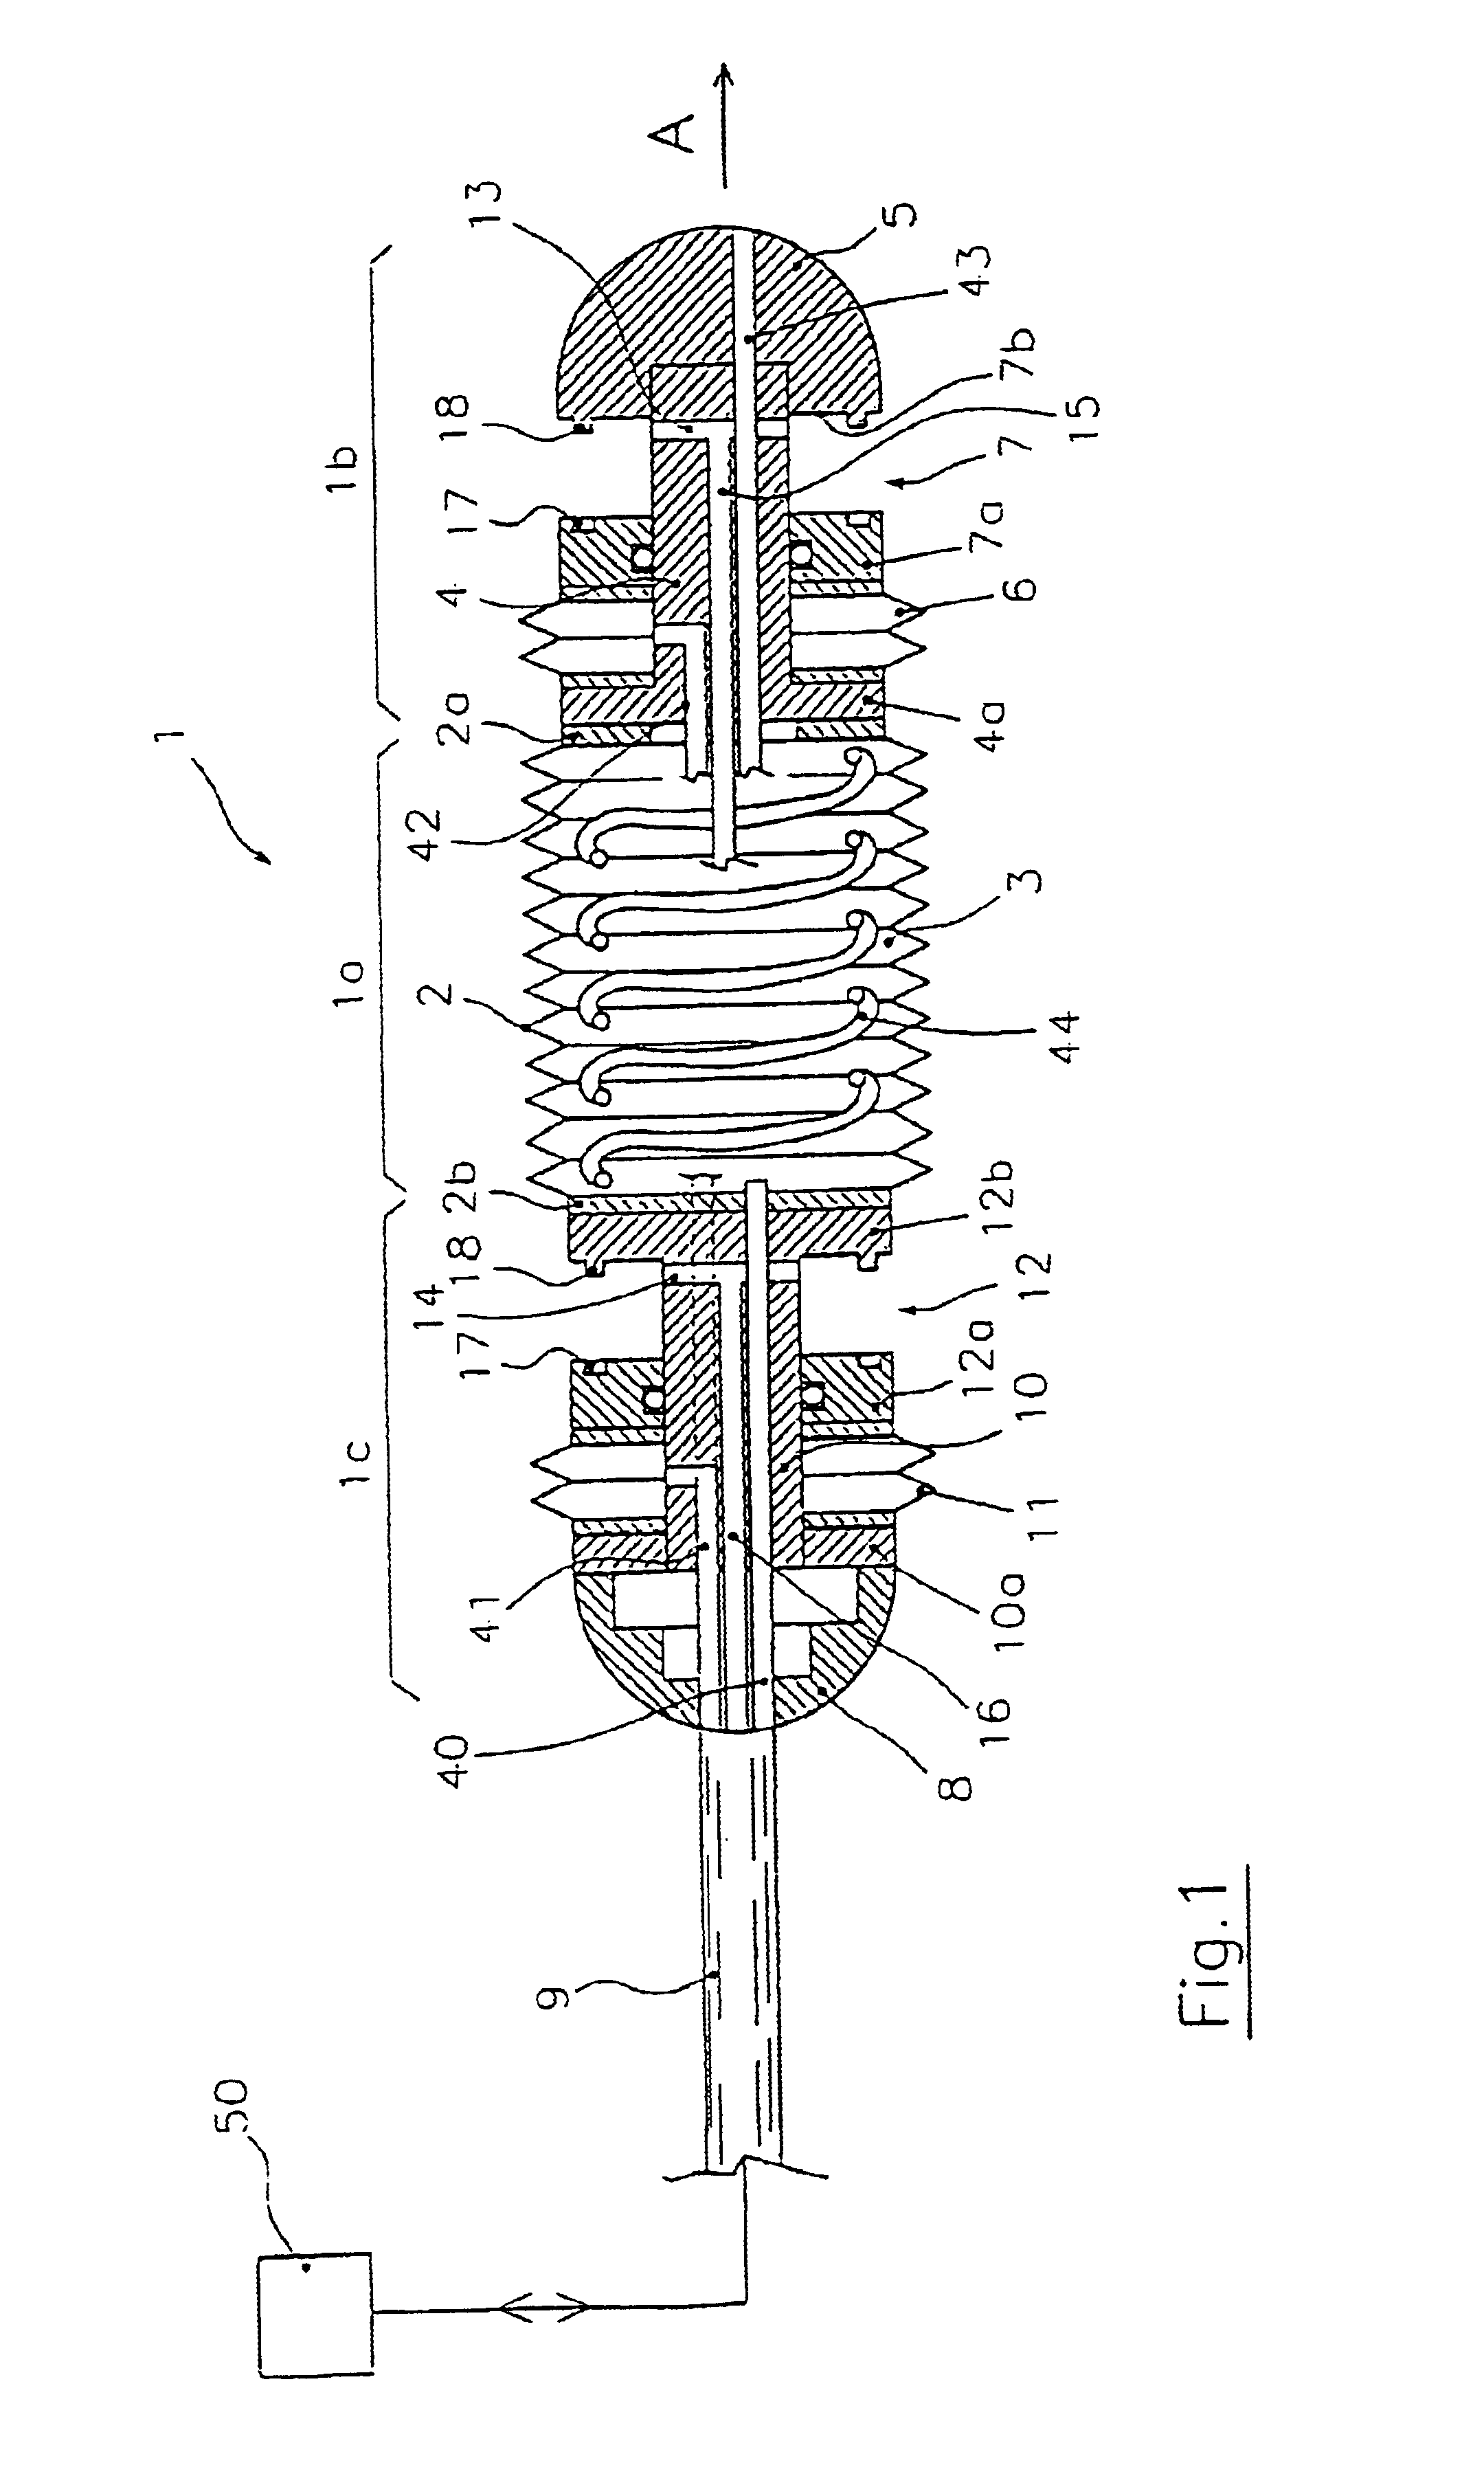 Endoscopic device for locomotion through the gastro-intestinal tract